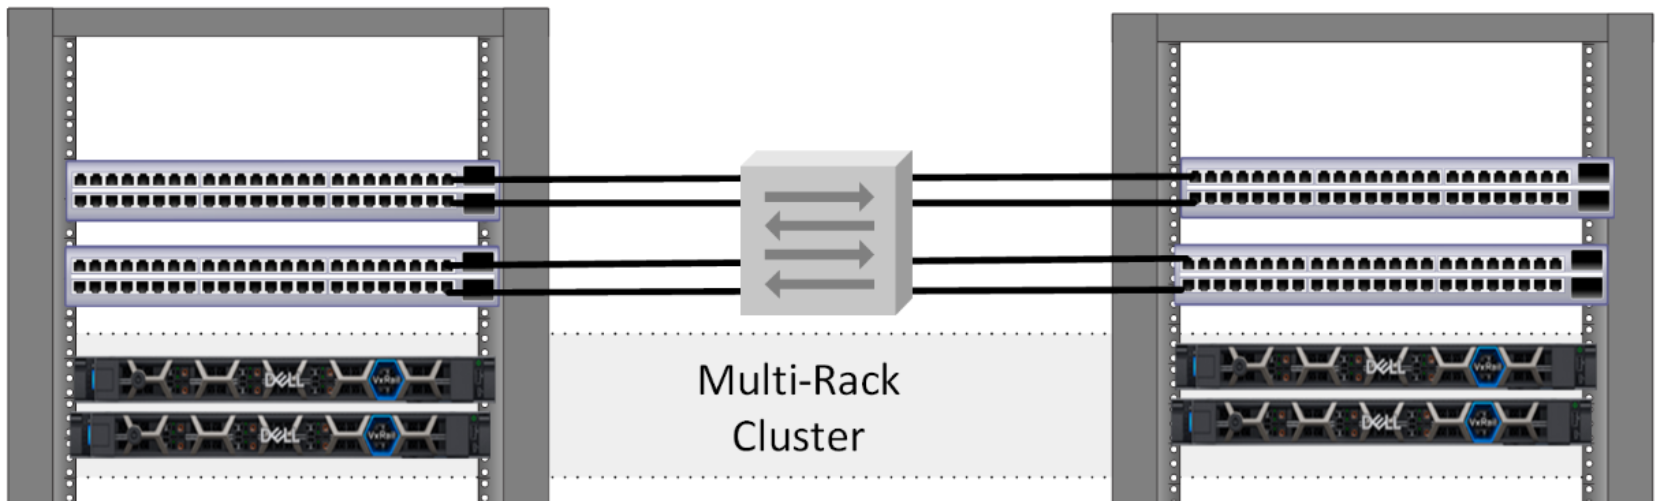 This figure shows VxRail cluster nodes in a multi-rack cluster. 